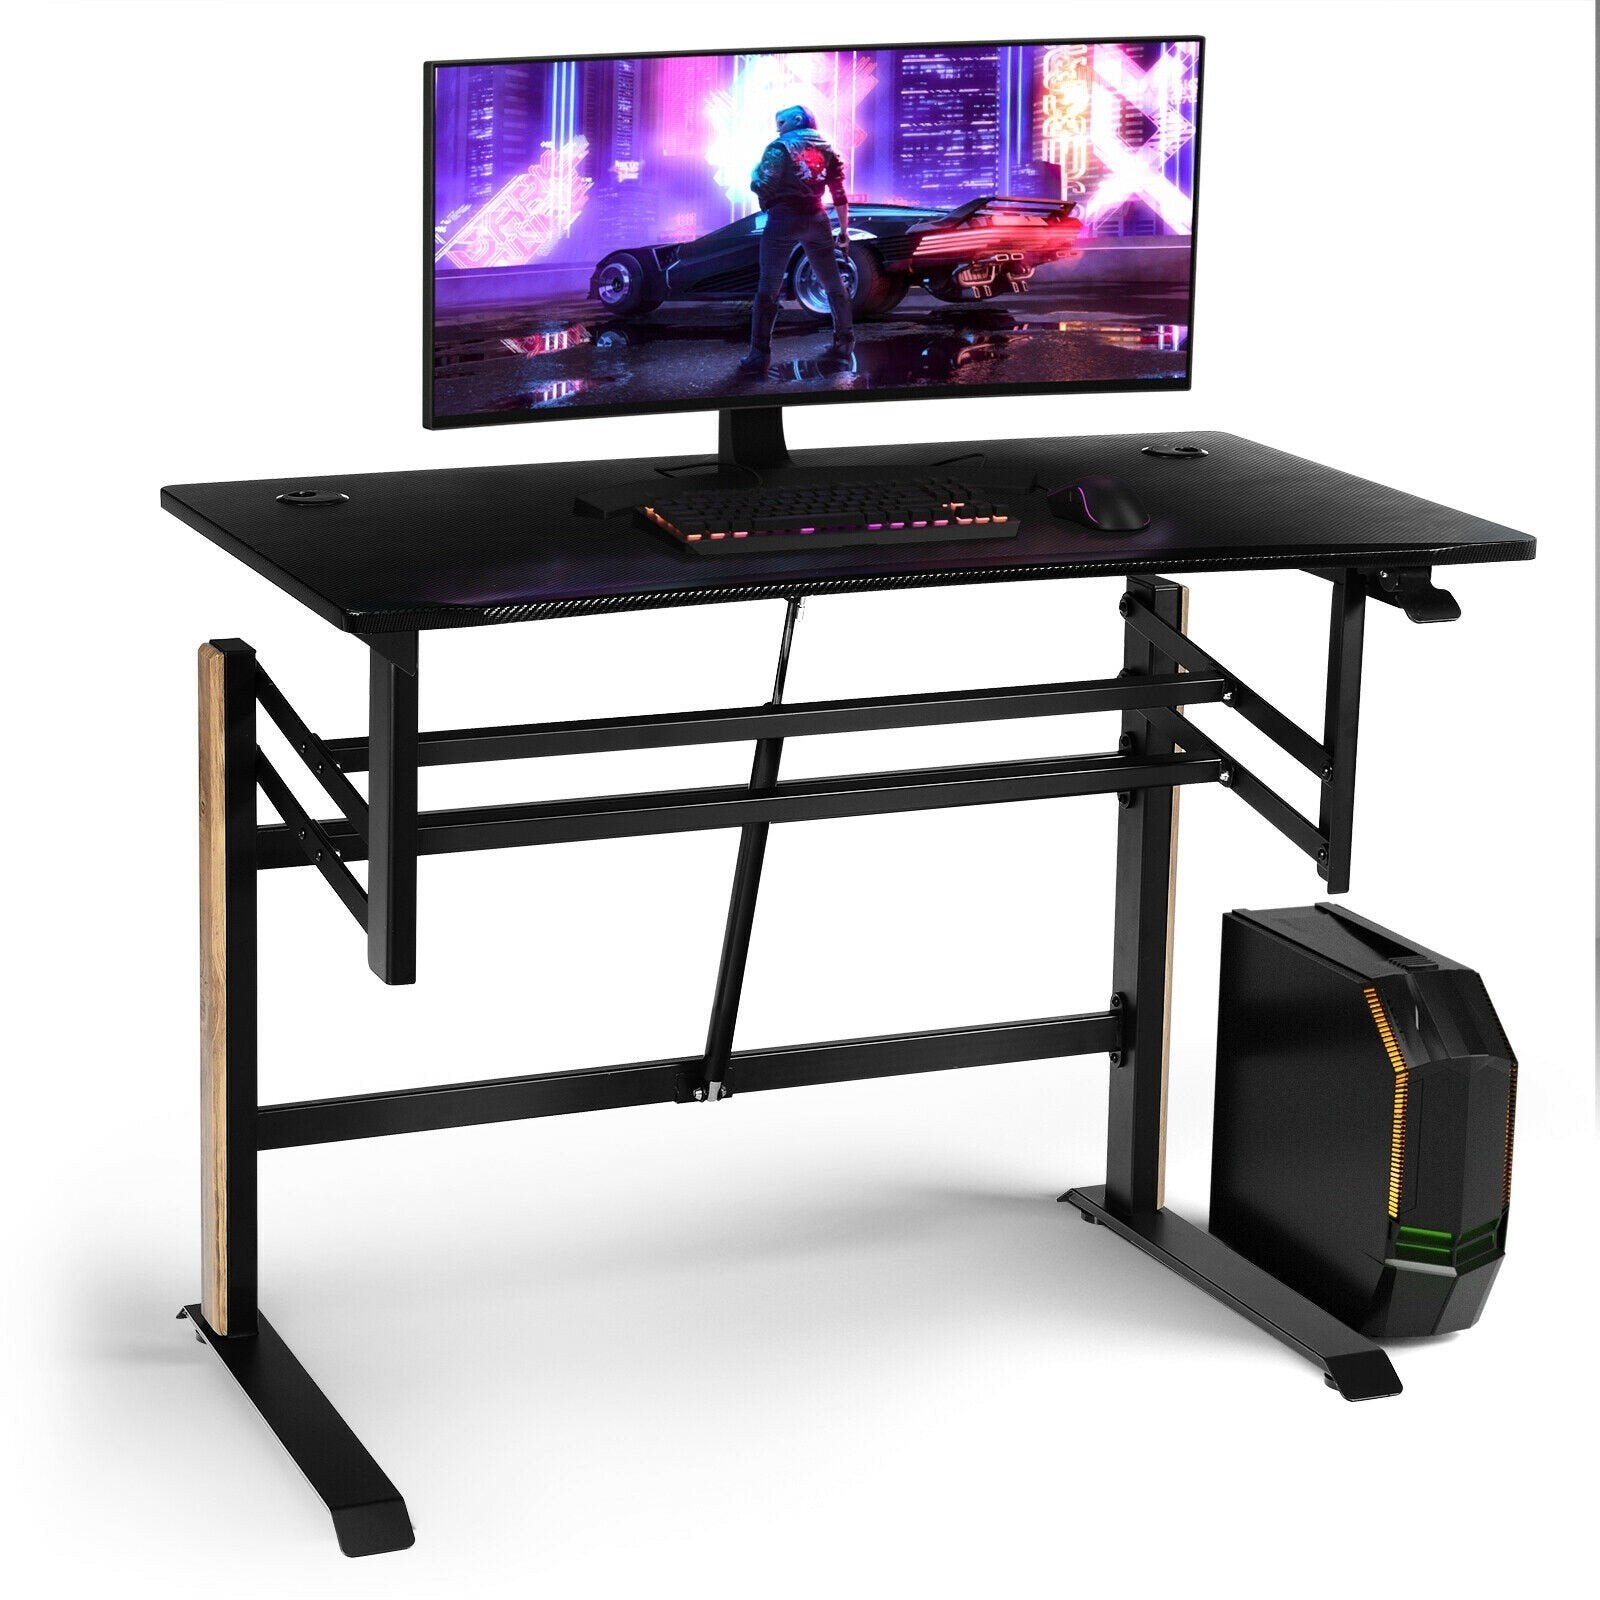 Gaming Desks - Pneumatic Height Adjustable Gaming Desk T Shaped Game Station With Power Strip Tray-Black